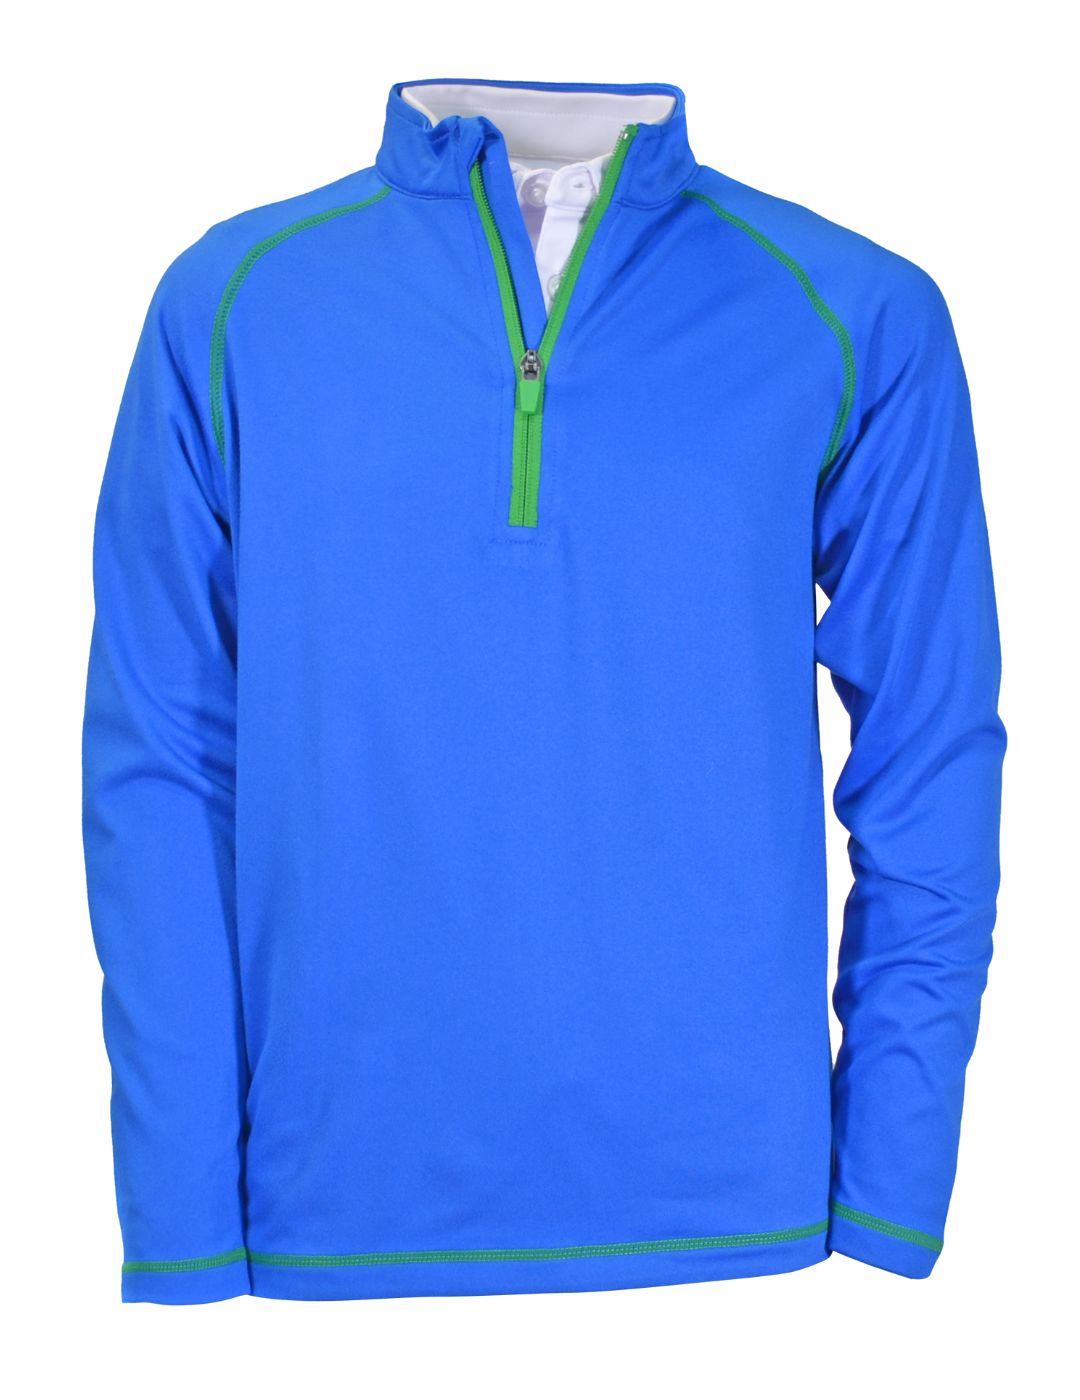 Gibson Youth Boys' Pullover